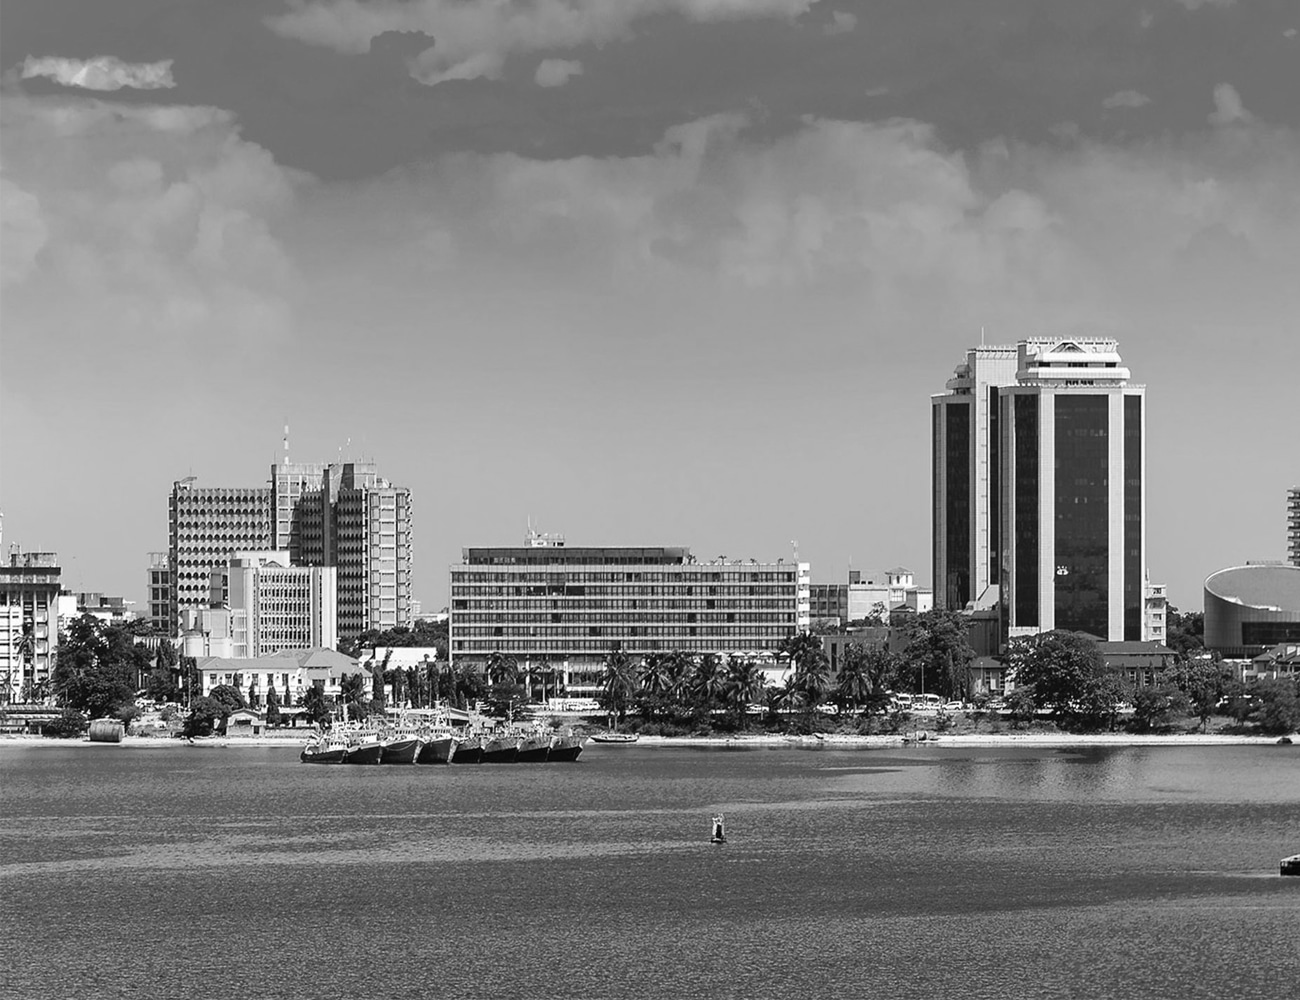 A view of the City of Dar es Salaam